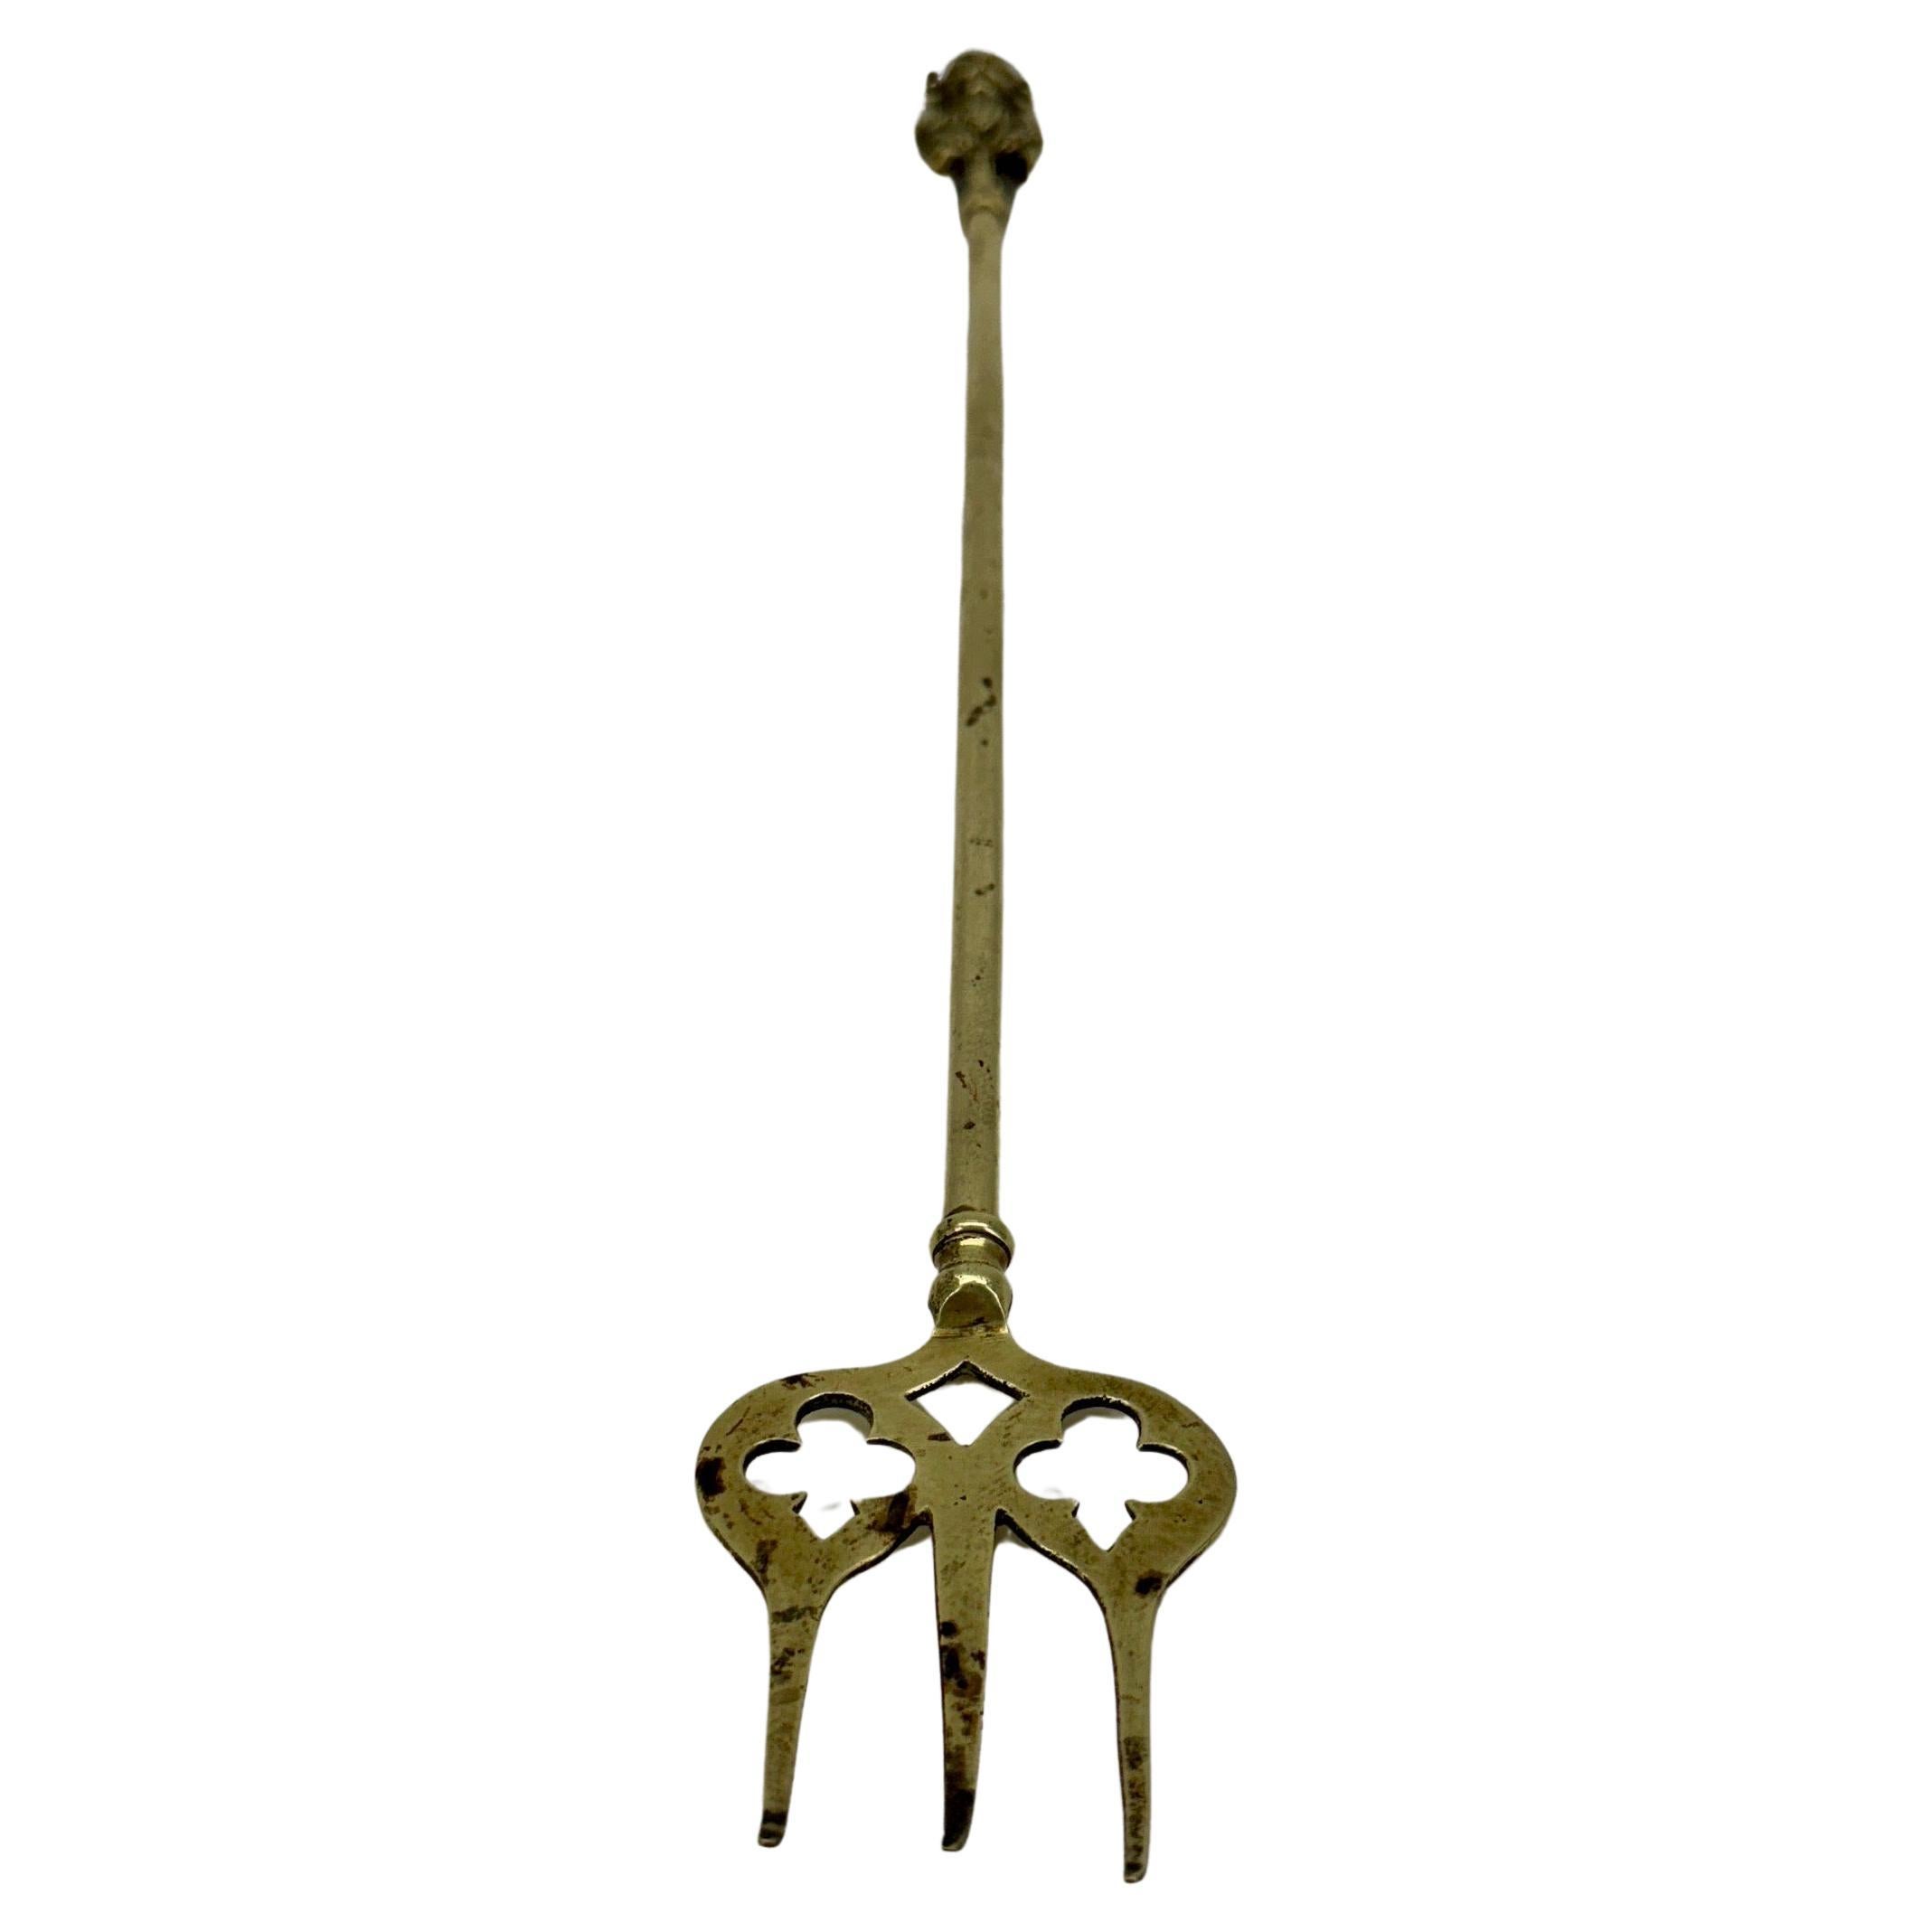 Antique Neptune shared brass fireplace toasting-fork tool.